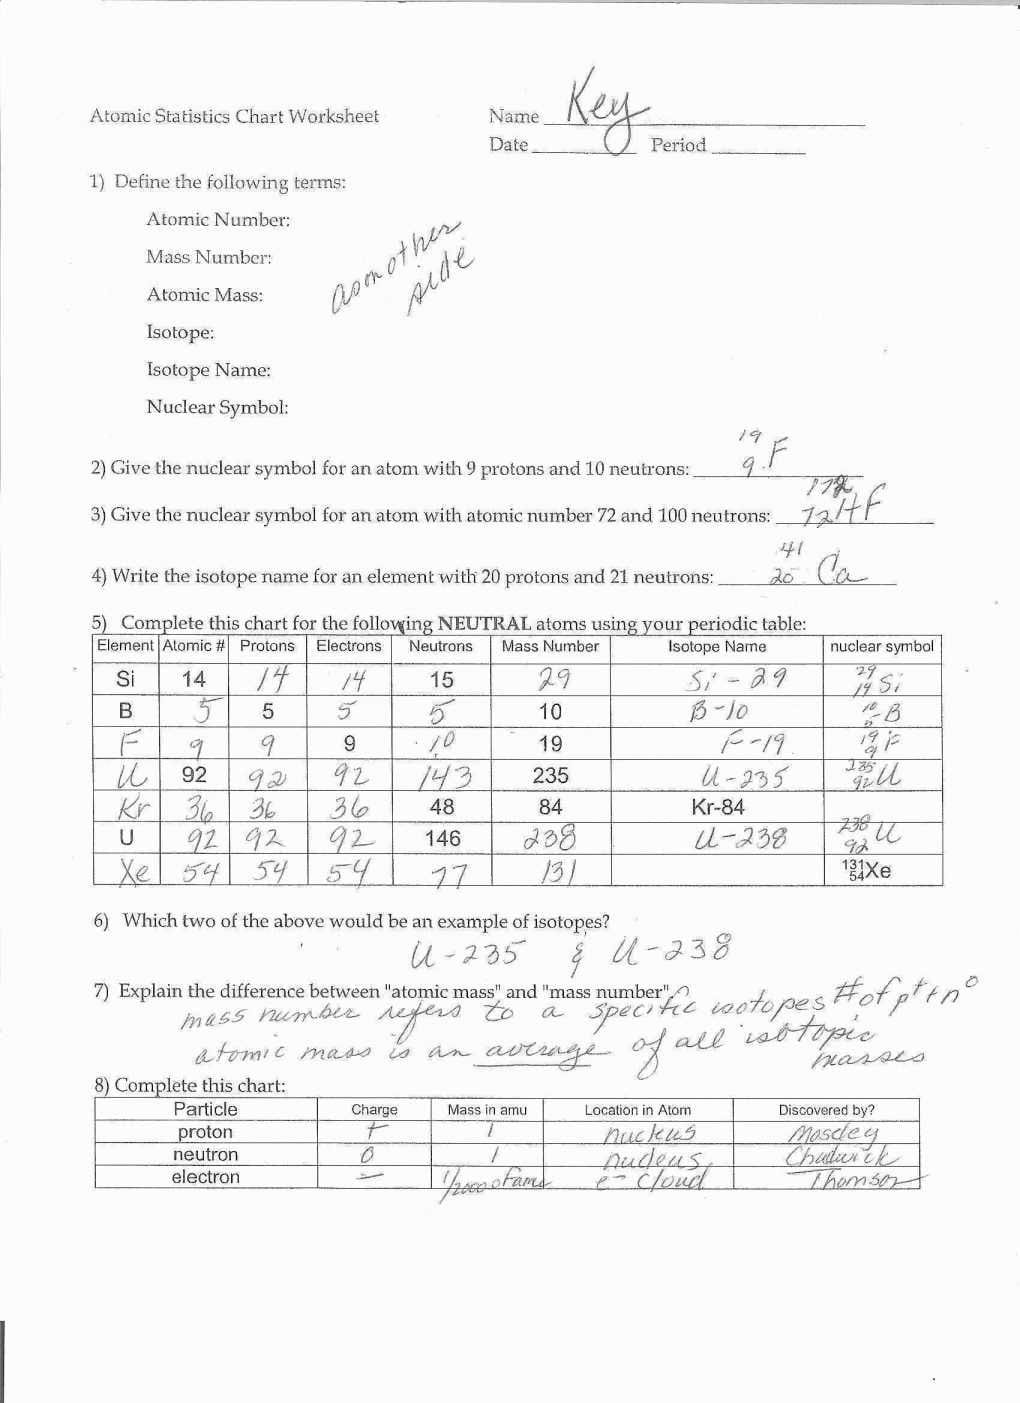 50-isotope-practice-worksheet-answer-key-chessmuseum-template-library